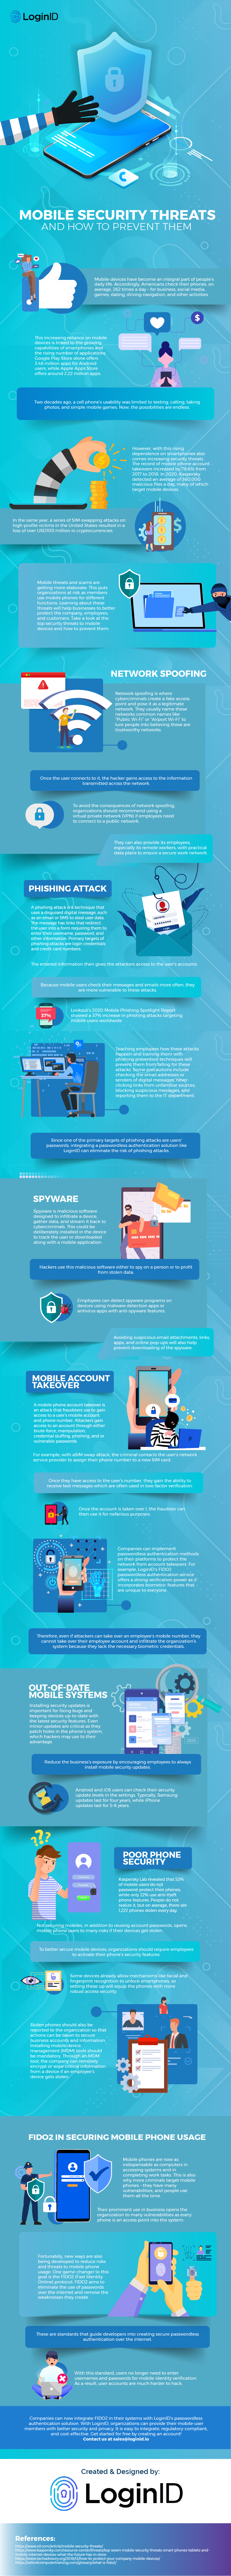 Mobile_Security_Threats_and_How_to_ Prevent_Them_infographic_image